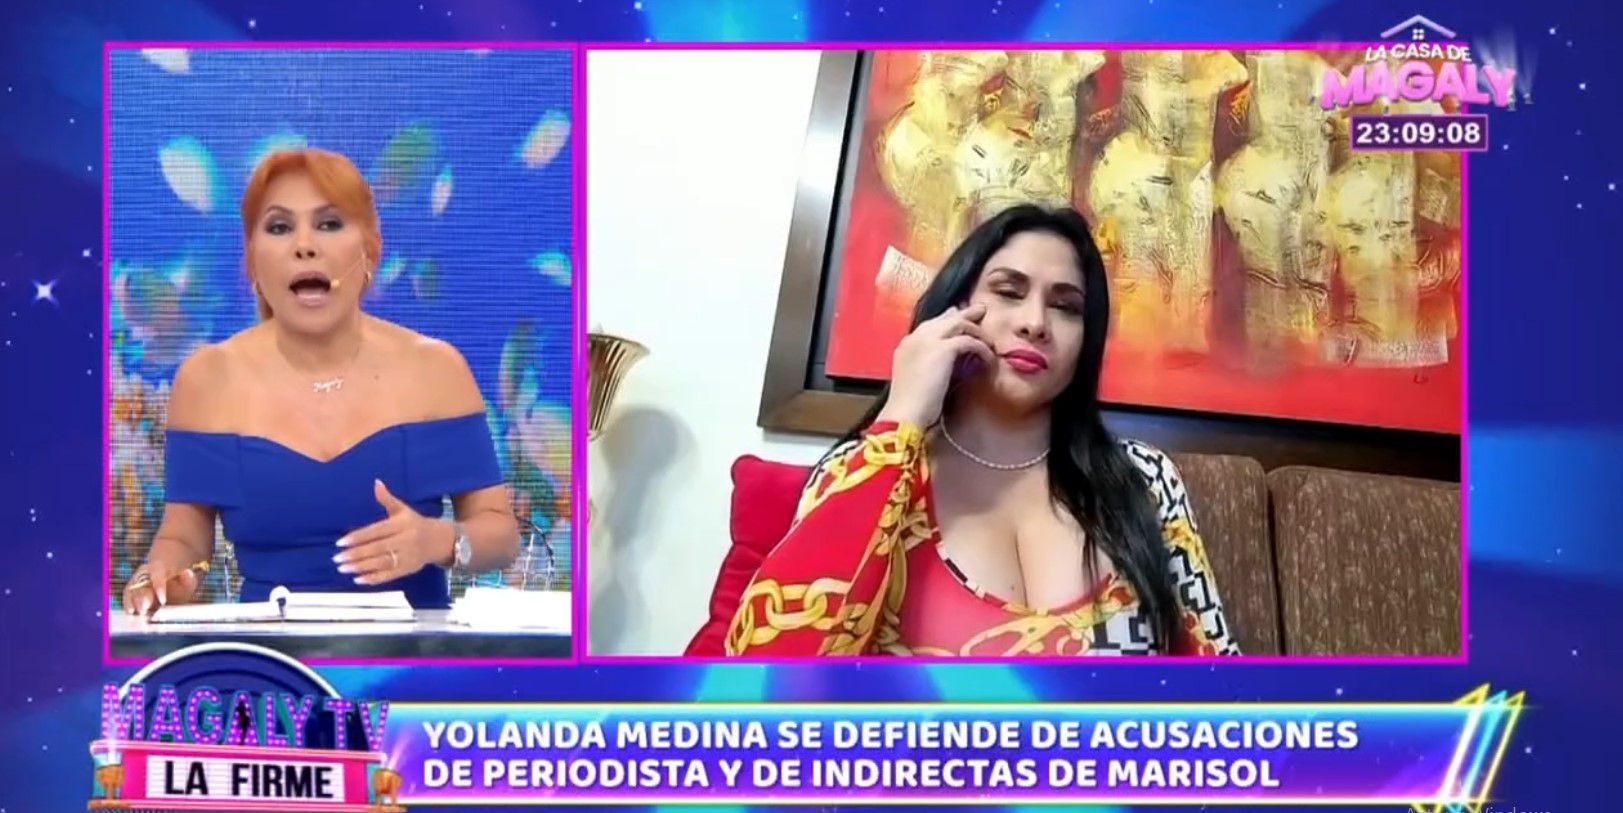 Yolanda Medina defends herself against journalist accusations.  (Source: Magaly TV La Firme)